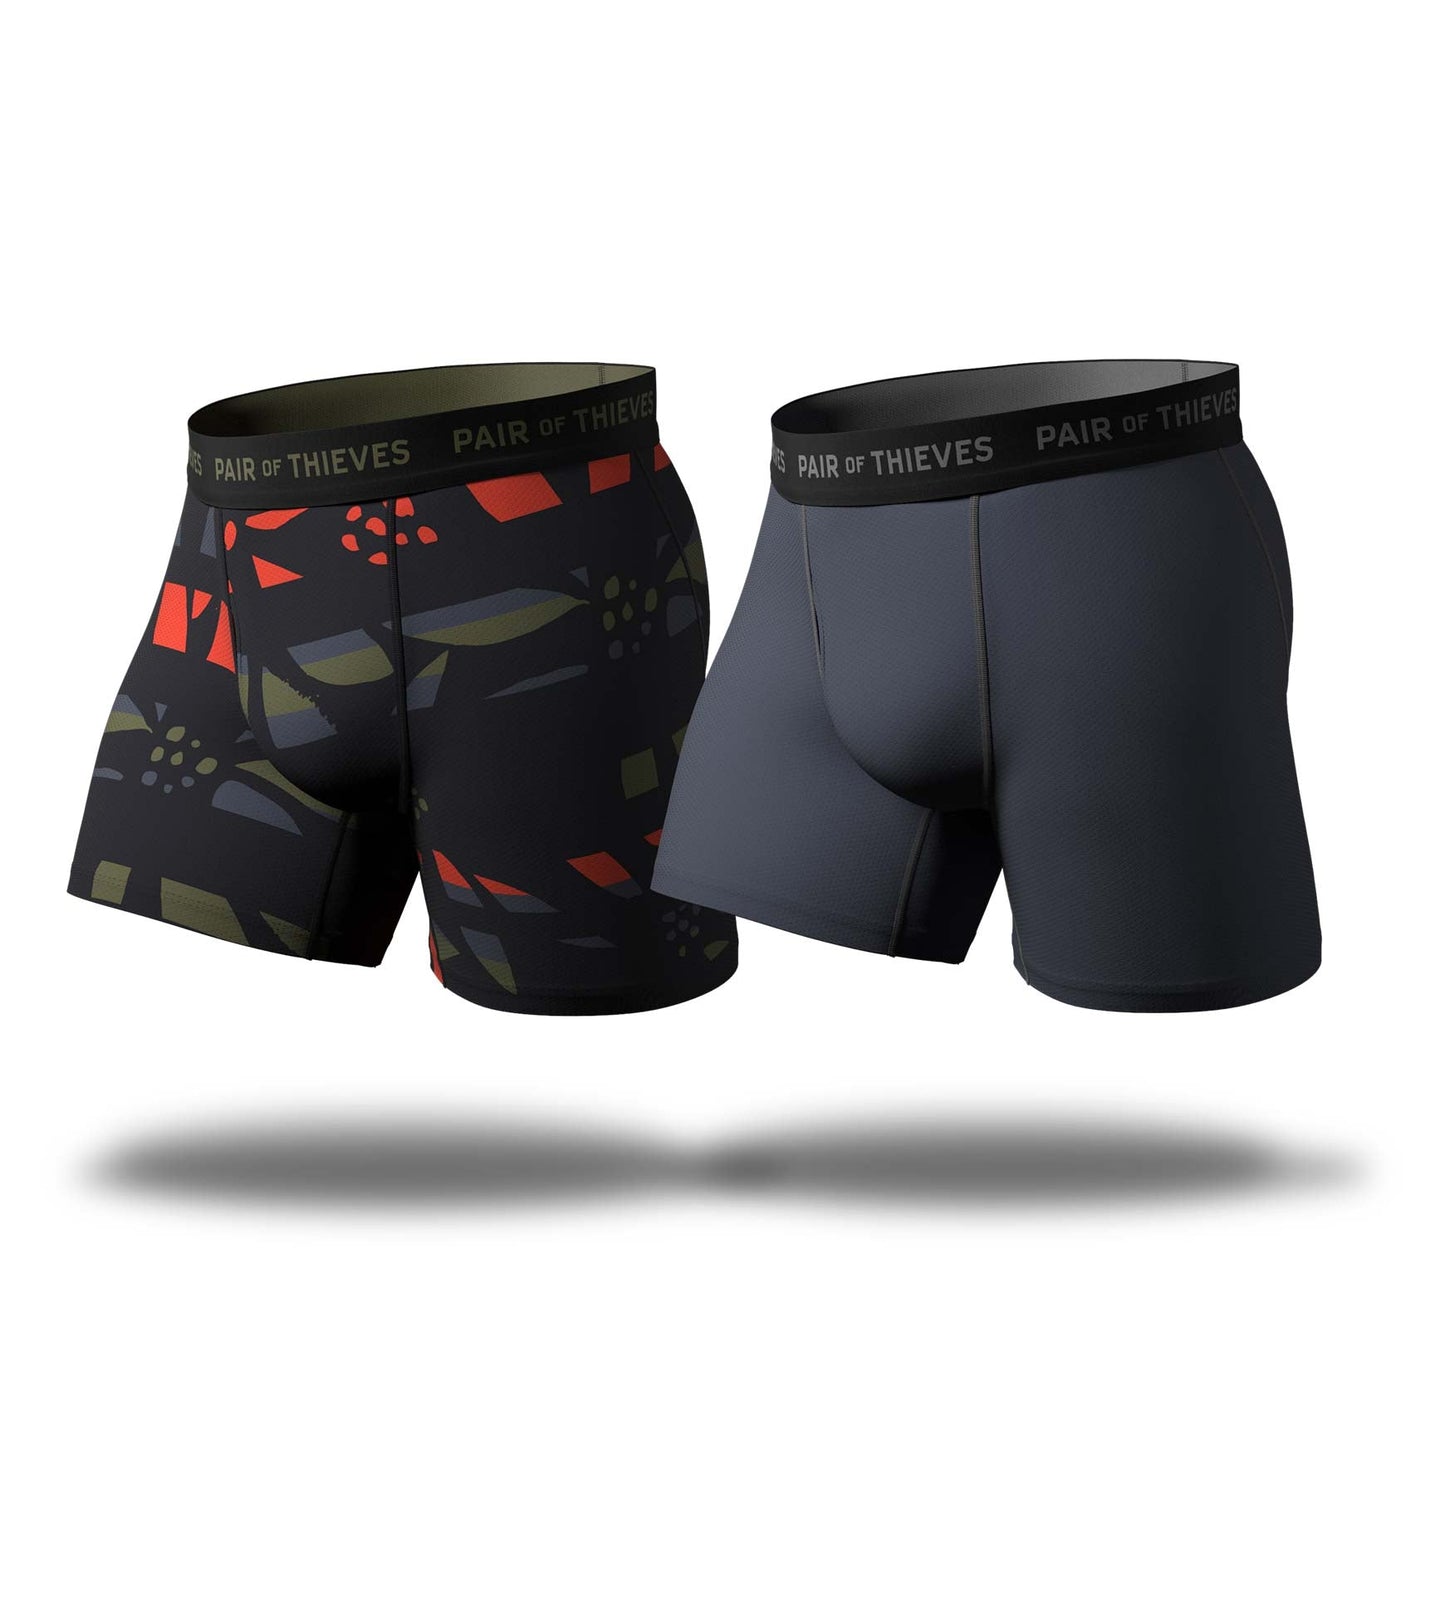 Ambaum -  SuperFit Boxer Briefs 2 Pack containing the colors Black, Dark slate gray, Silver, Dark Gray, Dark slate gray, Black, Sienna, Gray, Gains boro